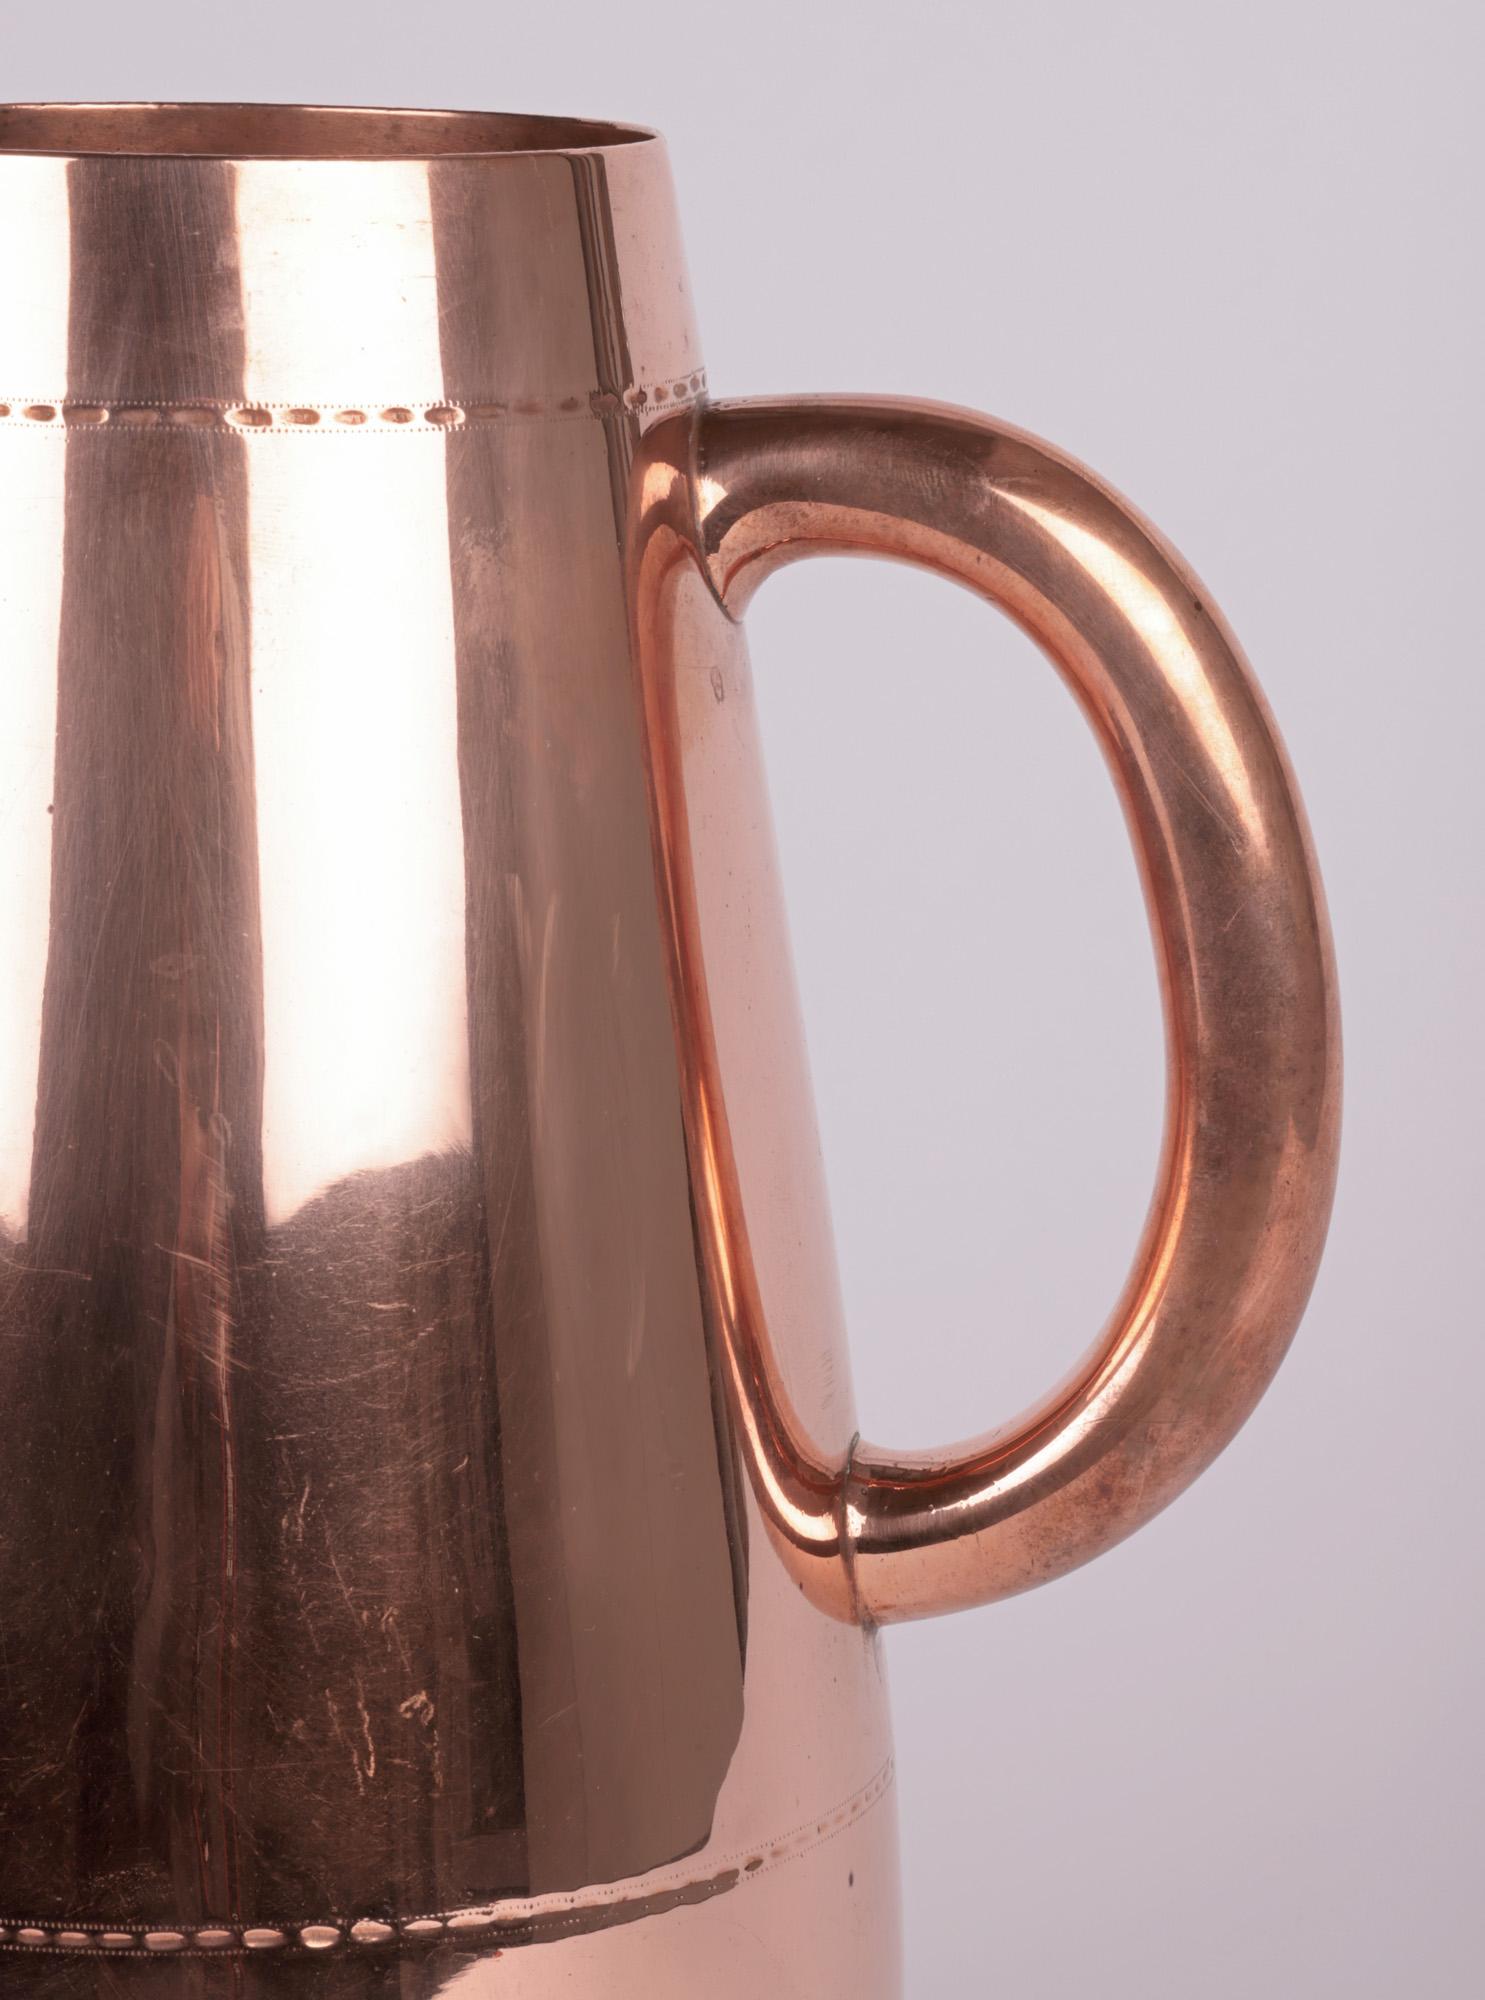 A large and exceptional aesthetic movement copper ale jug designed by renowned designer Christopher Dresser for Richard Hodd & Sons dating from around 1880. The tall stylish ale jug has a teardrop shaped body with a wide rounded base and stands